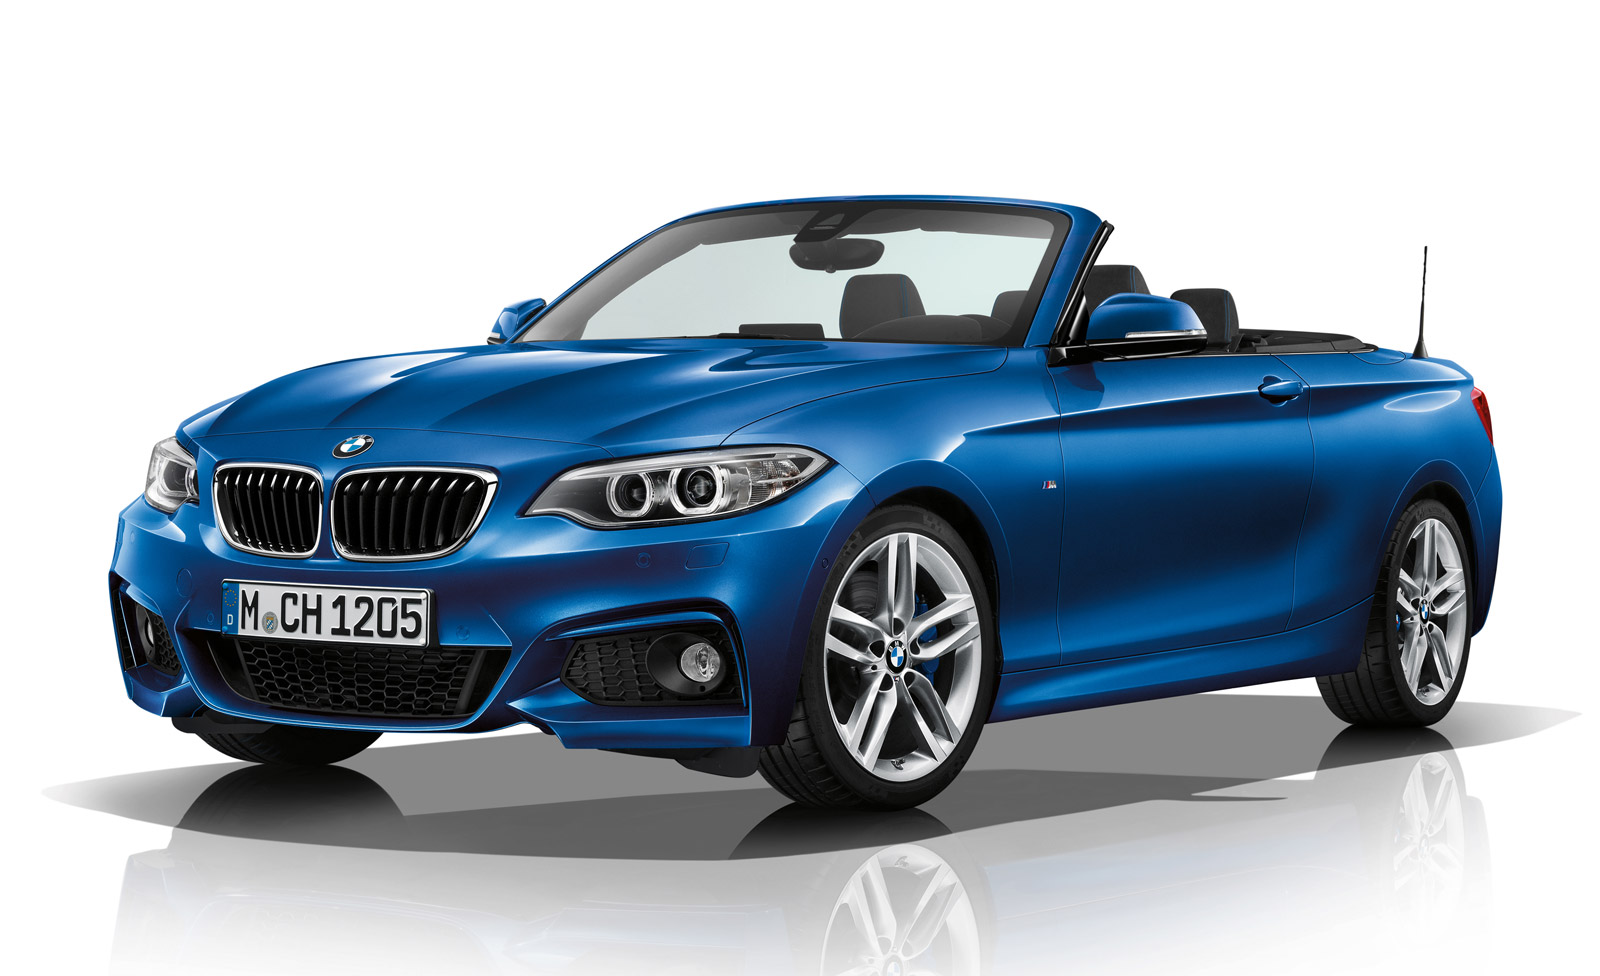 2015 BMW 2-Series Convertible Gets M Sport Package